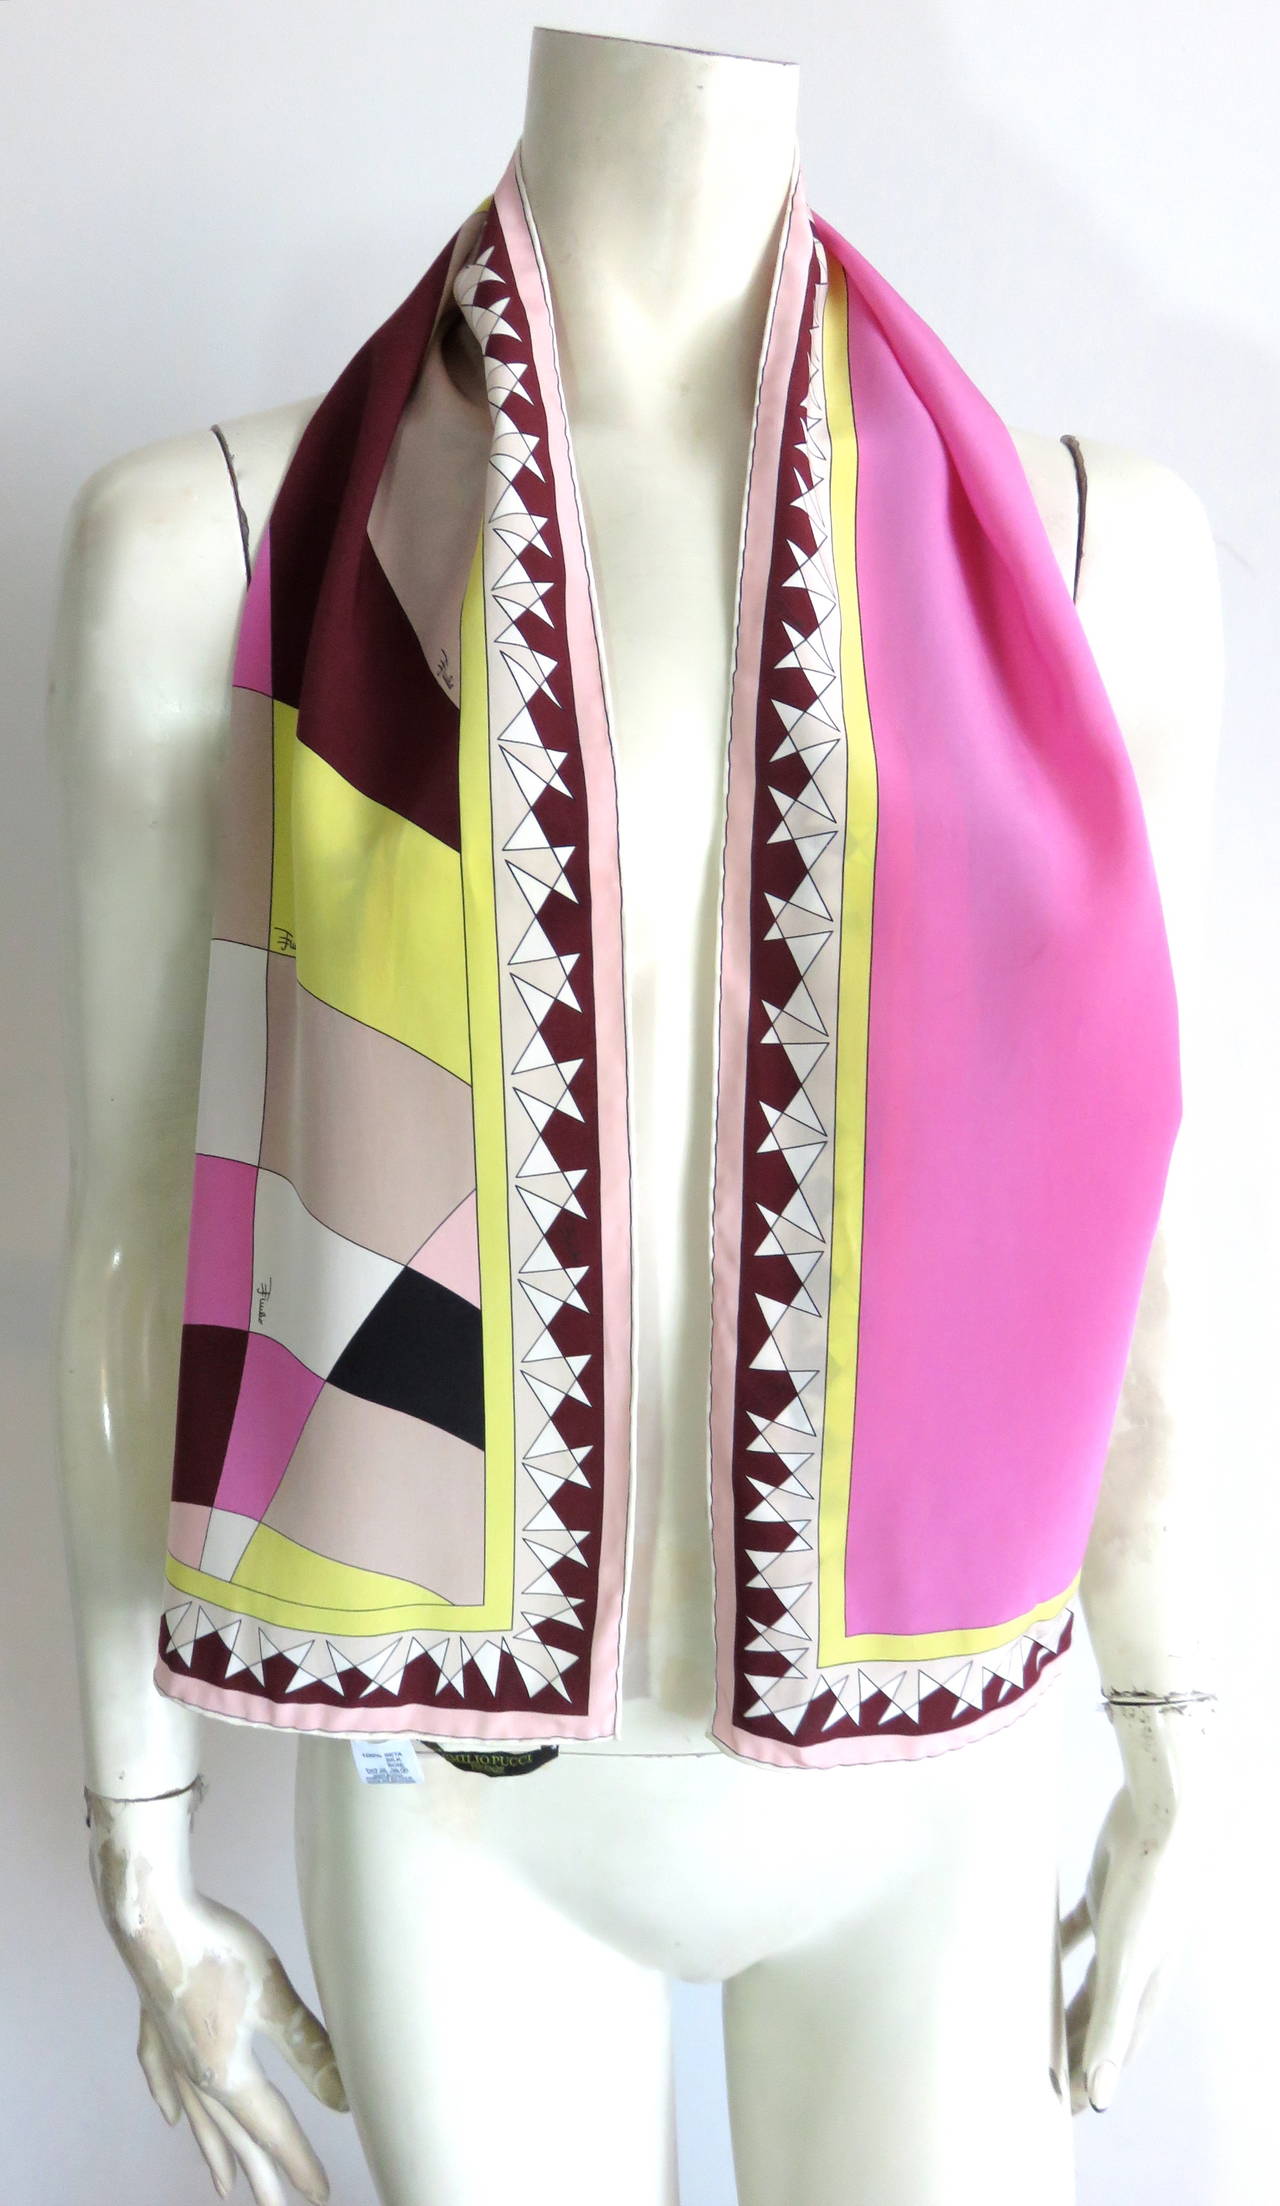 Never used, EMILIO PUCCI Geometric print silk scarf.

Signed, multi-color artwork with angled, 'star' motif border edge.

Hand-rolled edges.

Made in Italy, as labeled.

*MEASUREMENTS*

50